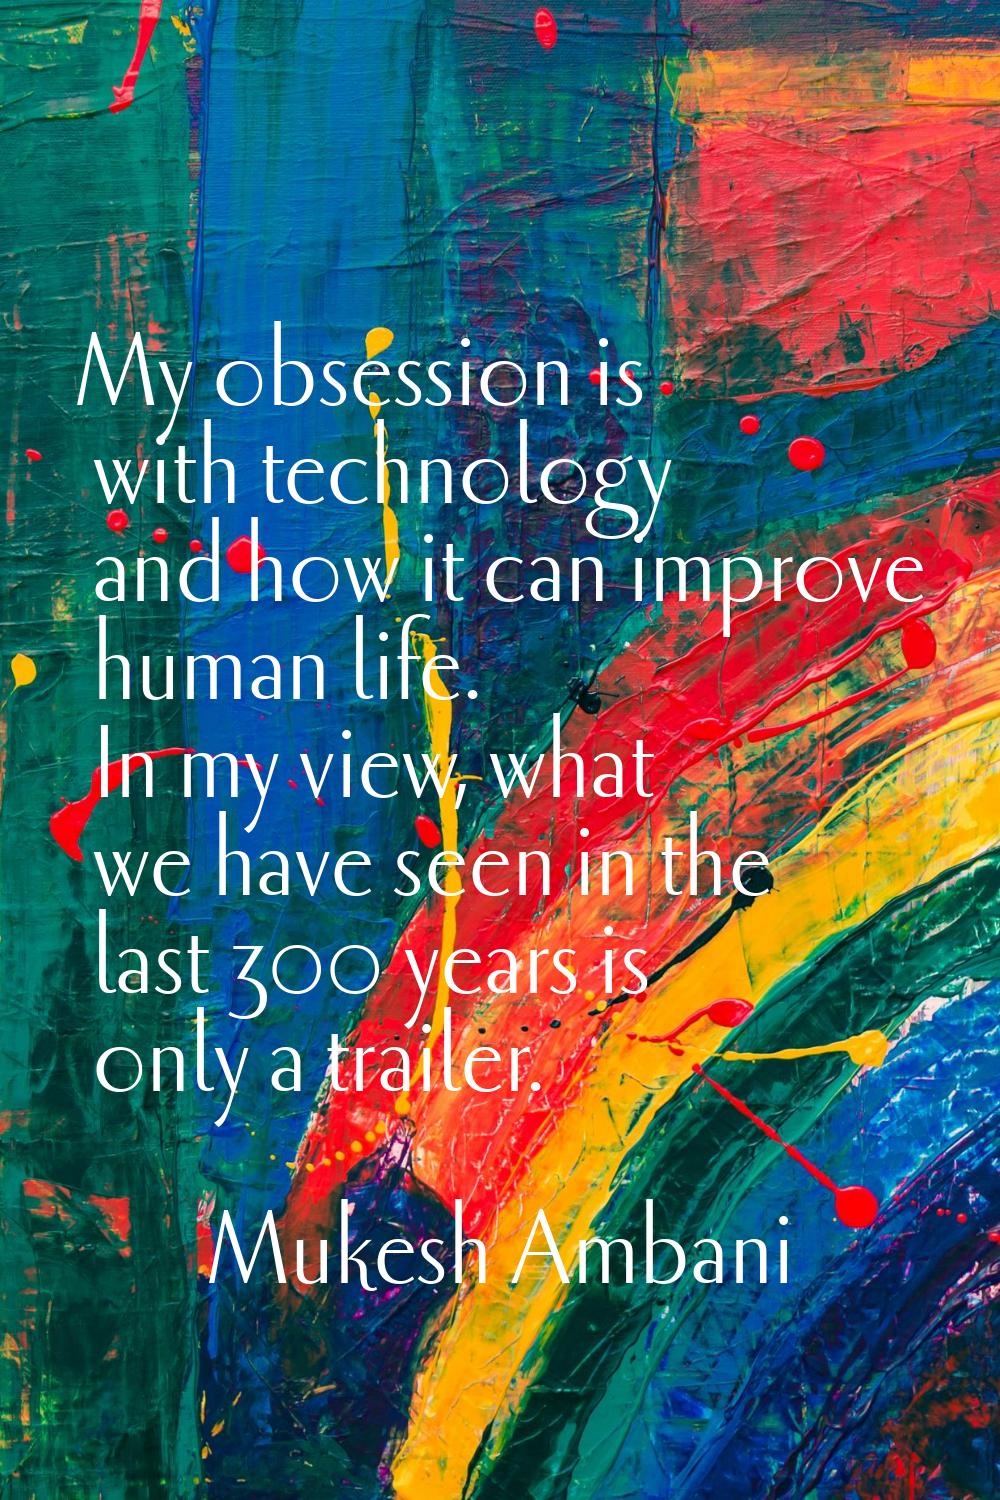 My obsession is with technology and how it can improve human life. In my view, what we have seen in